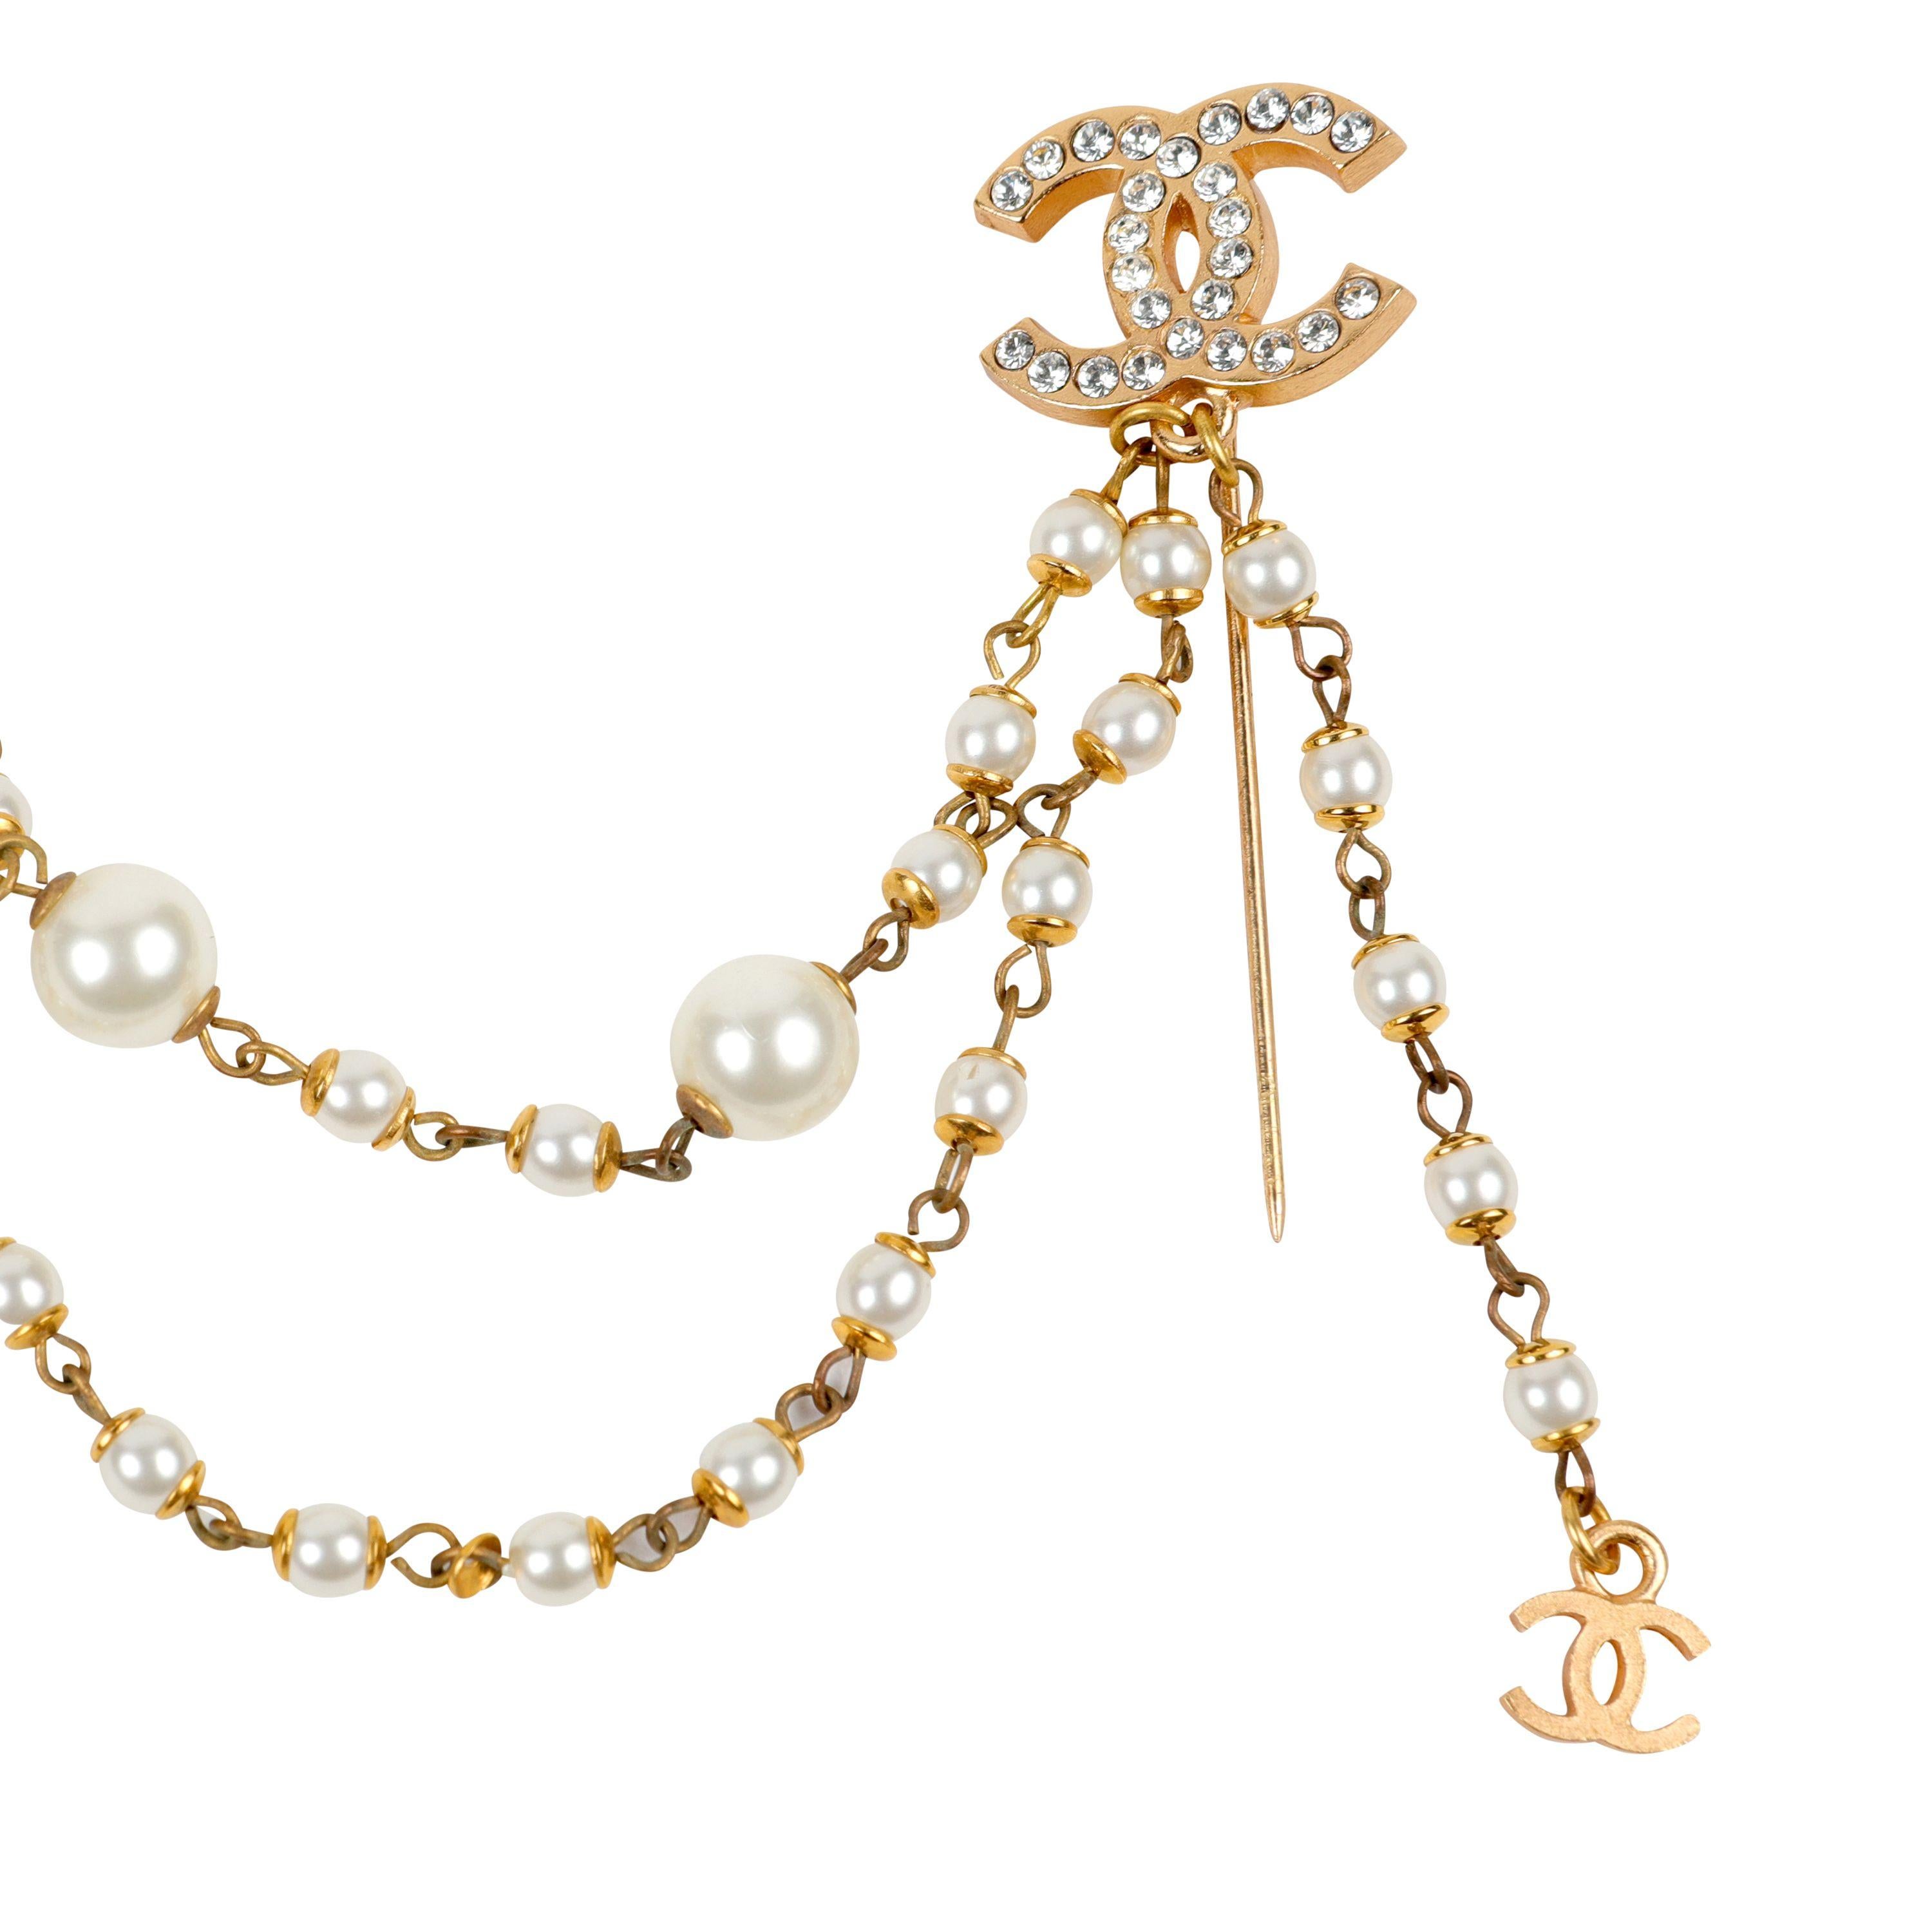 This authentic Chanel Crystal and Pearl Draped Chain Pin is pristine. Crystal adorned gold toned interlocking CCs are connected with draping pearl chains.  Made in France. Pouch or box included. 
PBF 13796
